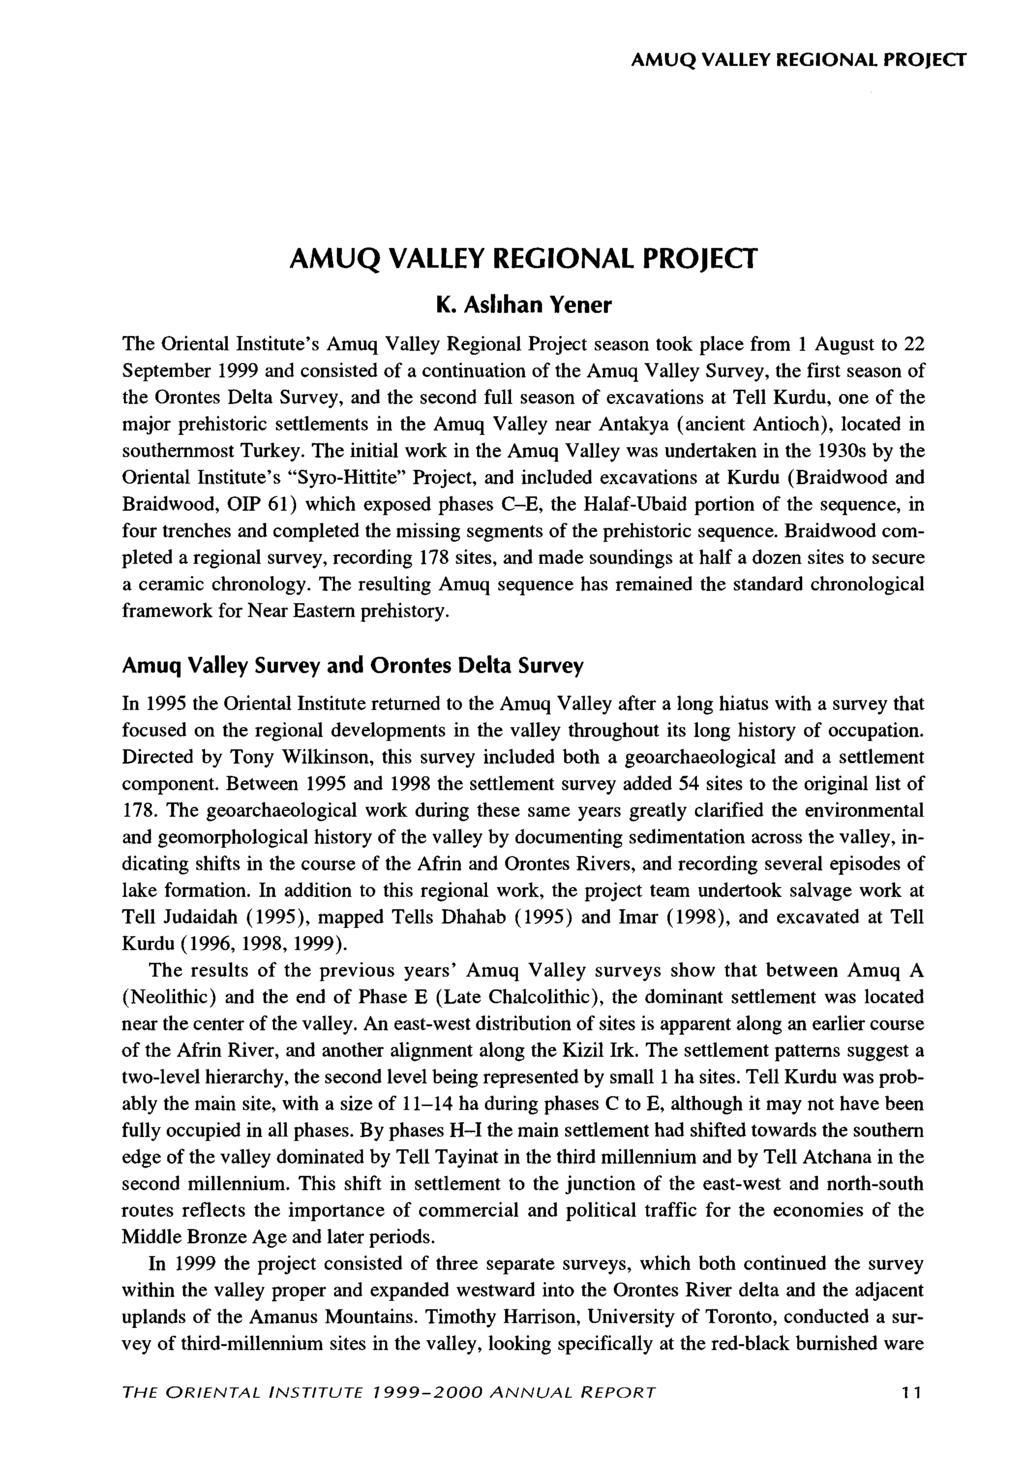 K. Aslihan Yener The Oriental Institute's Amuq Valley Regional Project season took place from 1 August to 22 September 1999 and consisted of a continuation of the Amuq Valley Survey, the first season